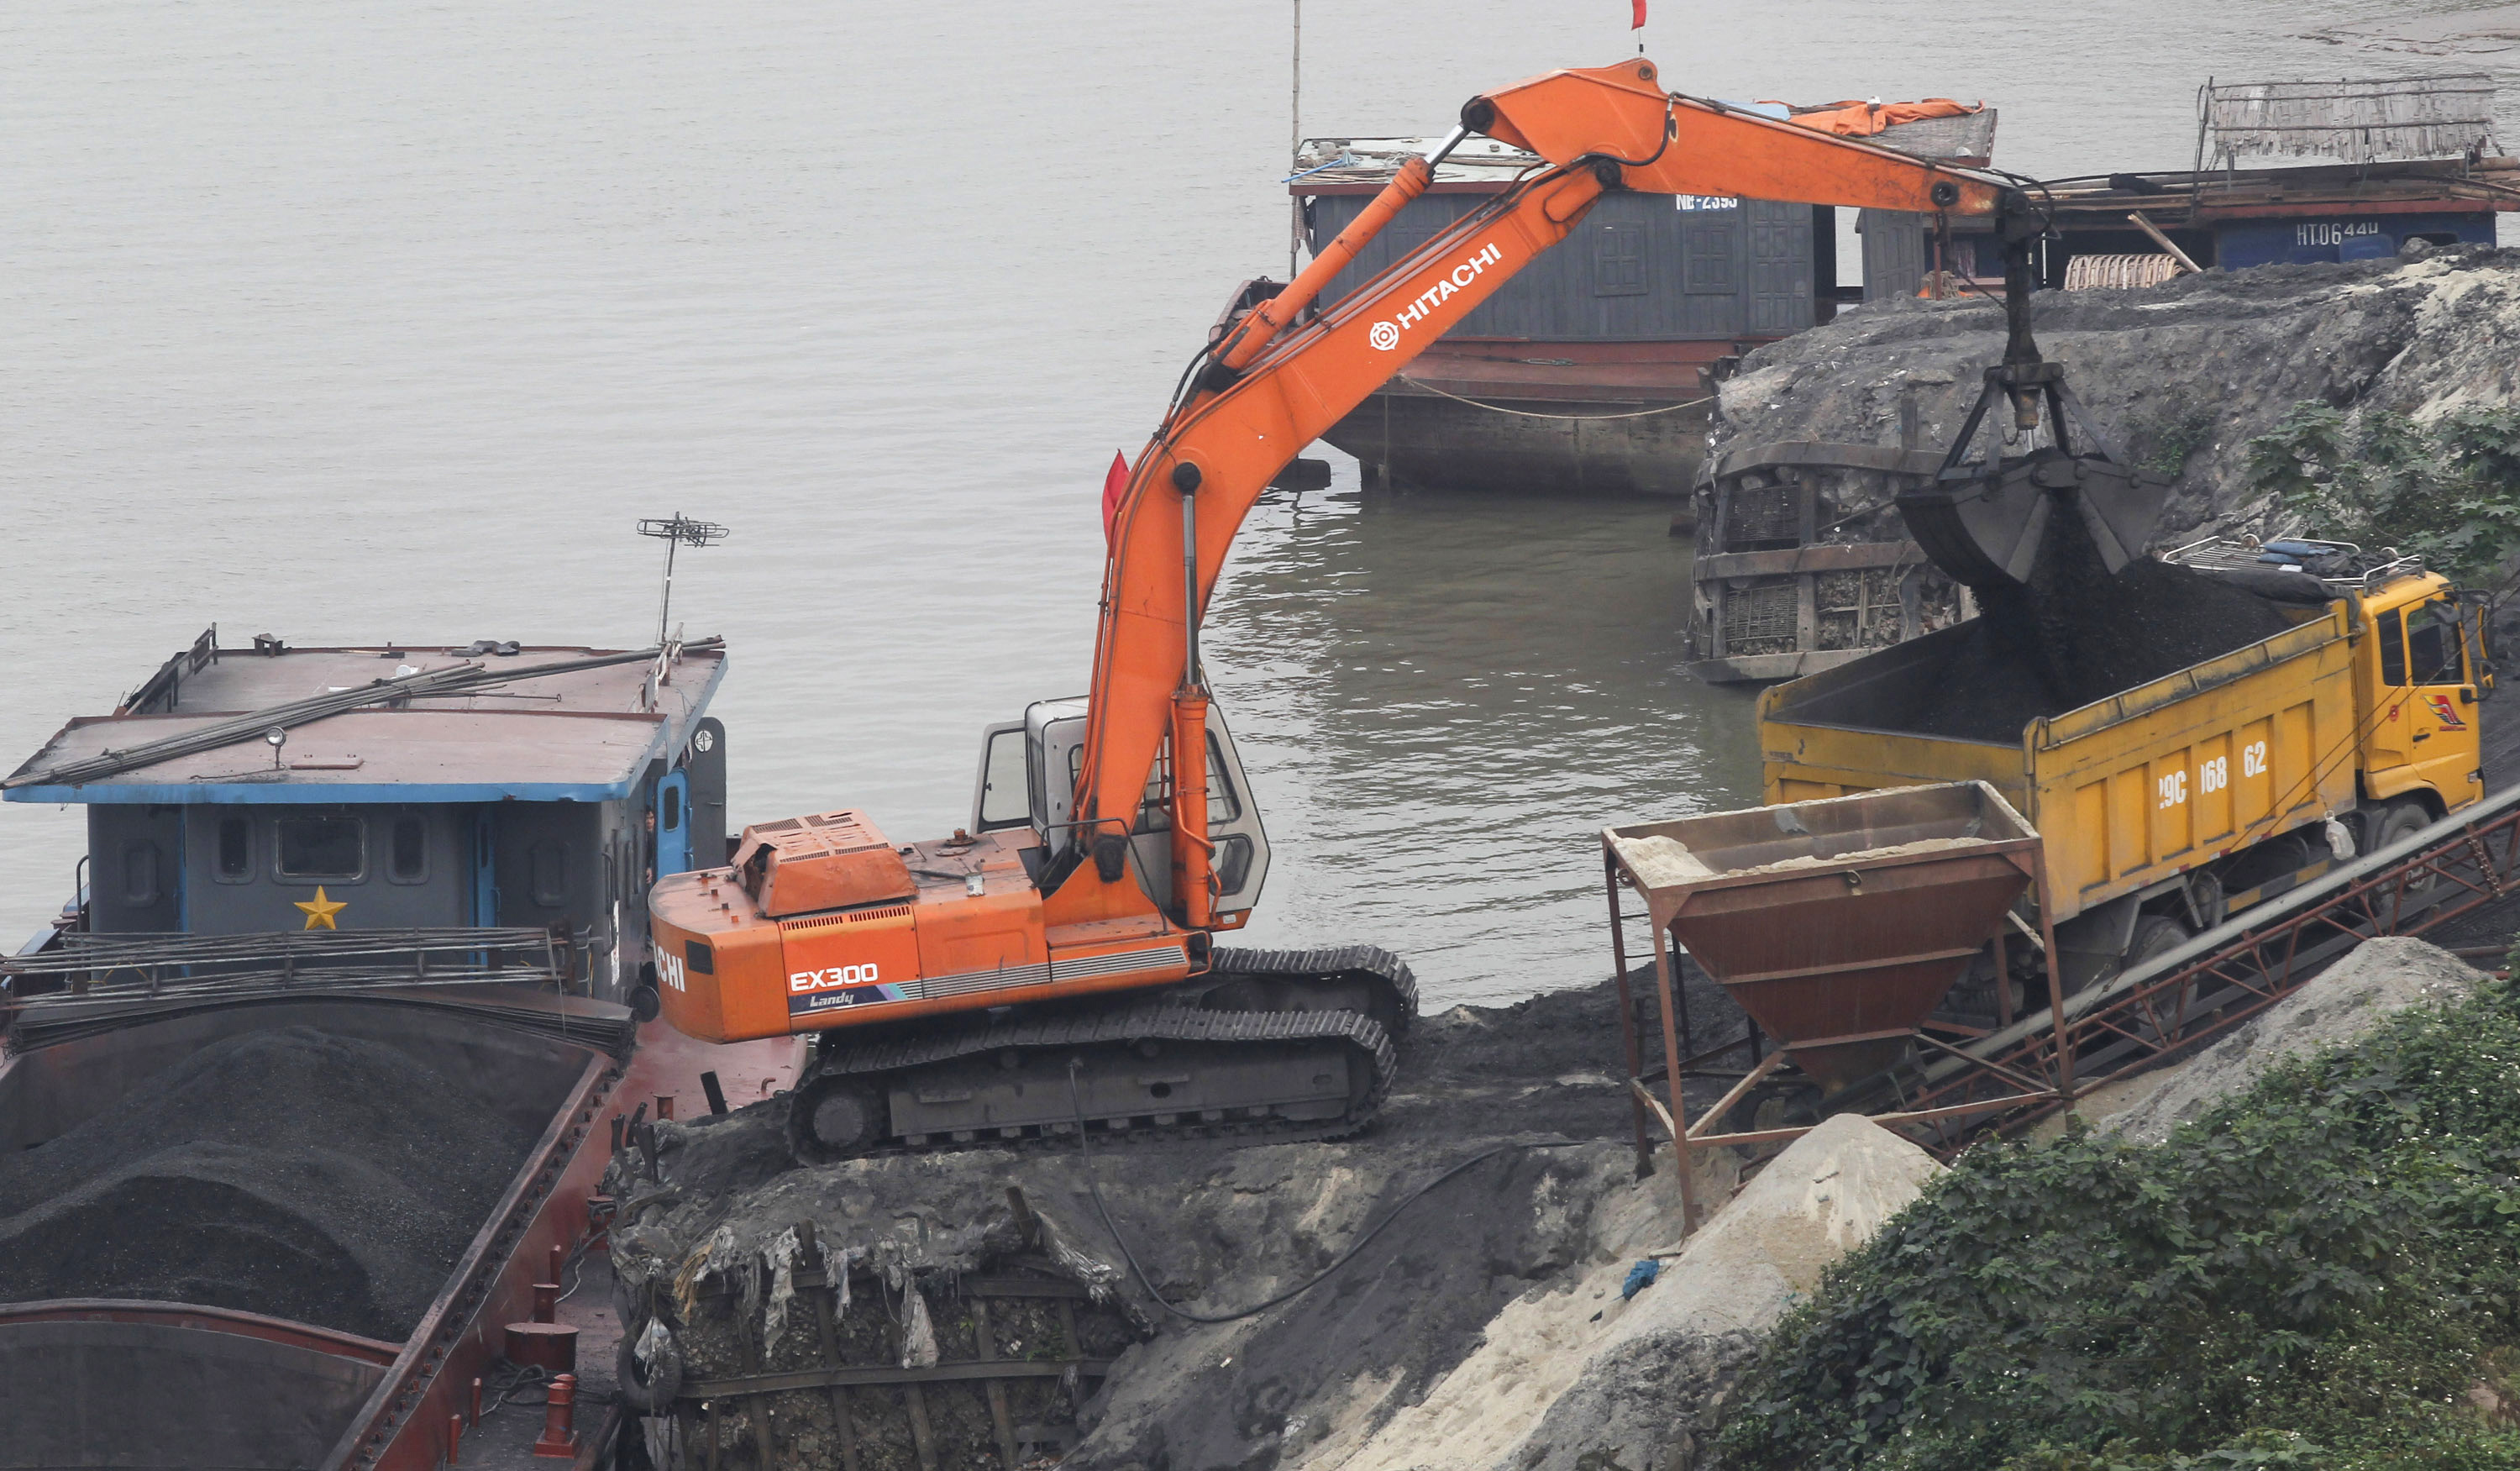 An excavator transfers coal from a ship onto a truck at a coal port in Hanoi